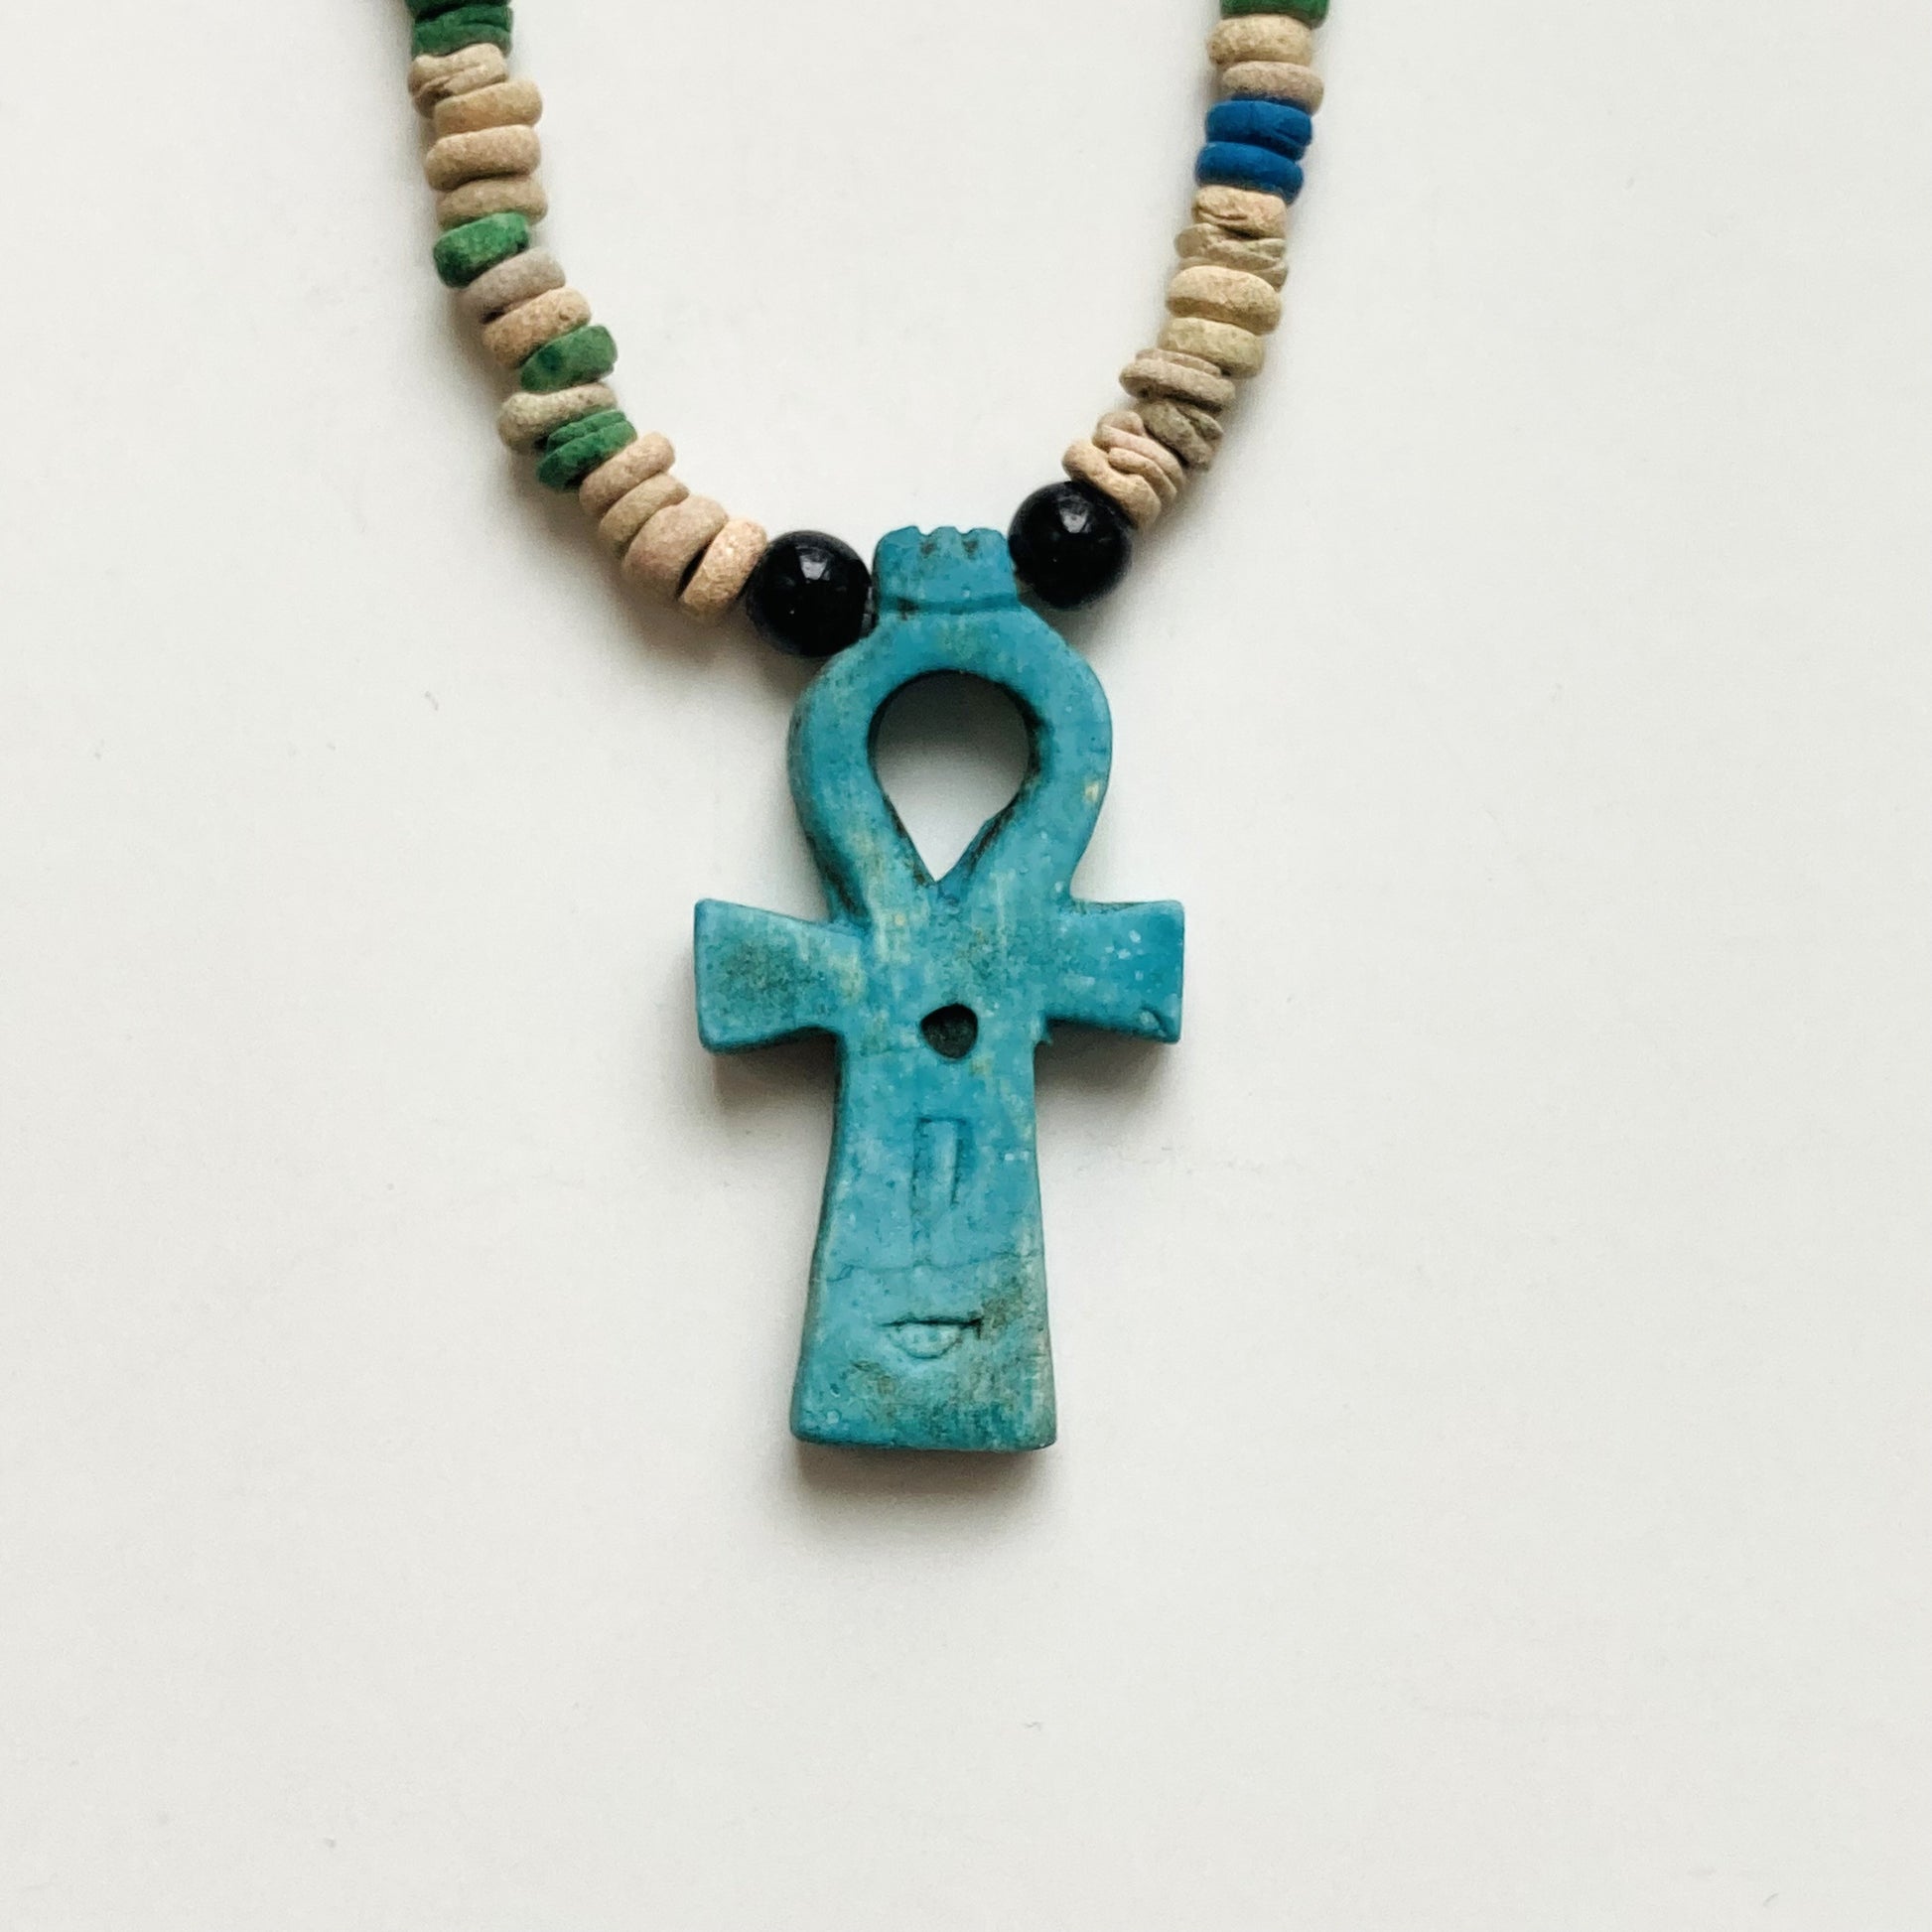 Ancient Egyptian Necklace with Ankh Amulet